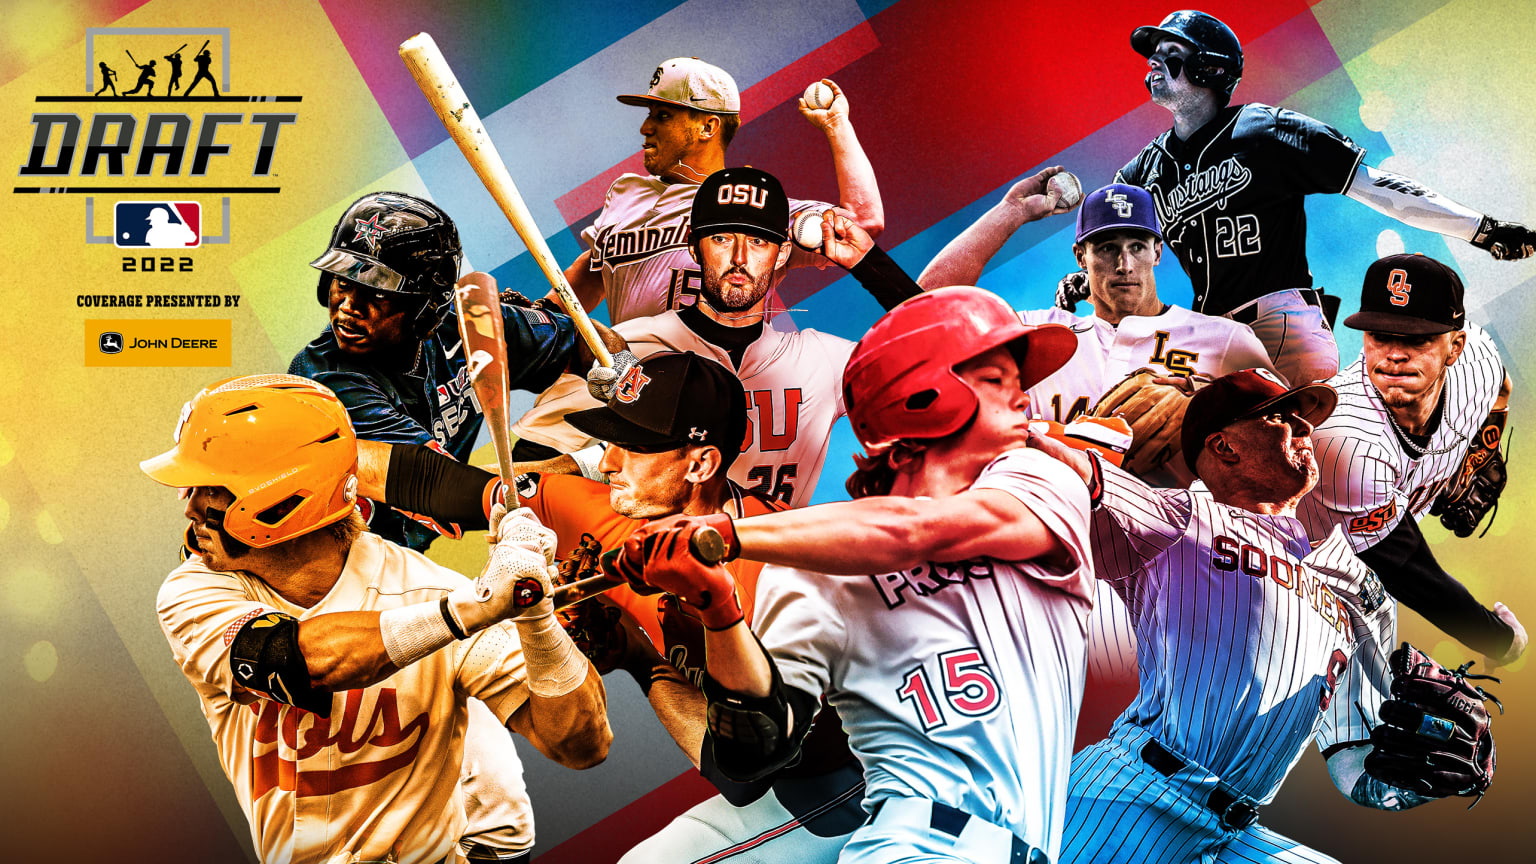 10 drafted players performing various baseball actions against a colorful background 